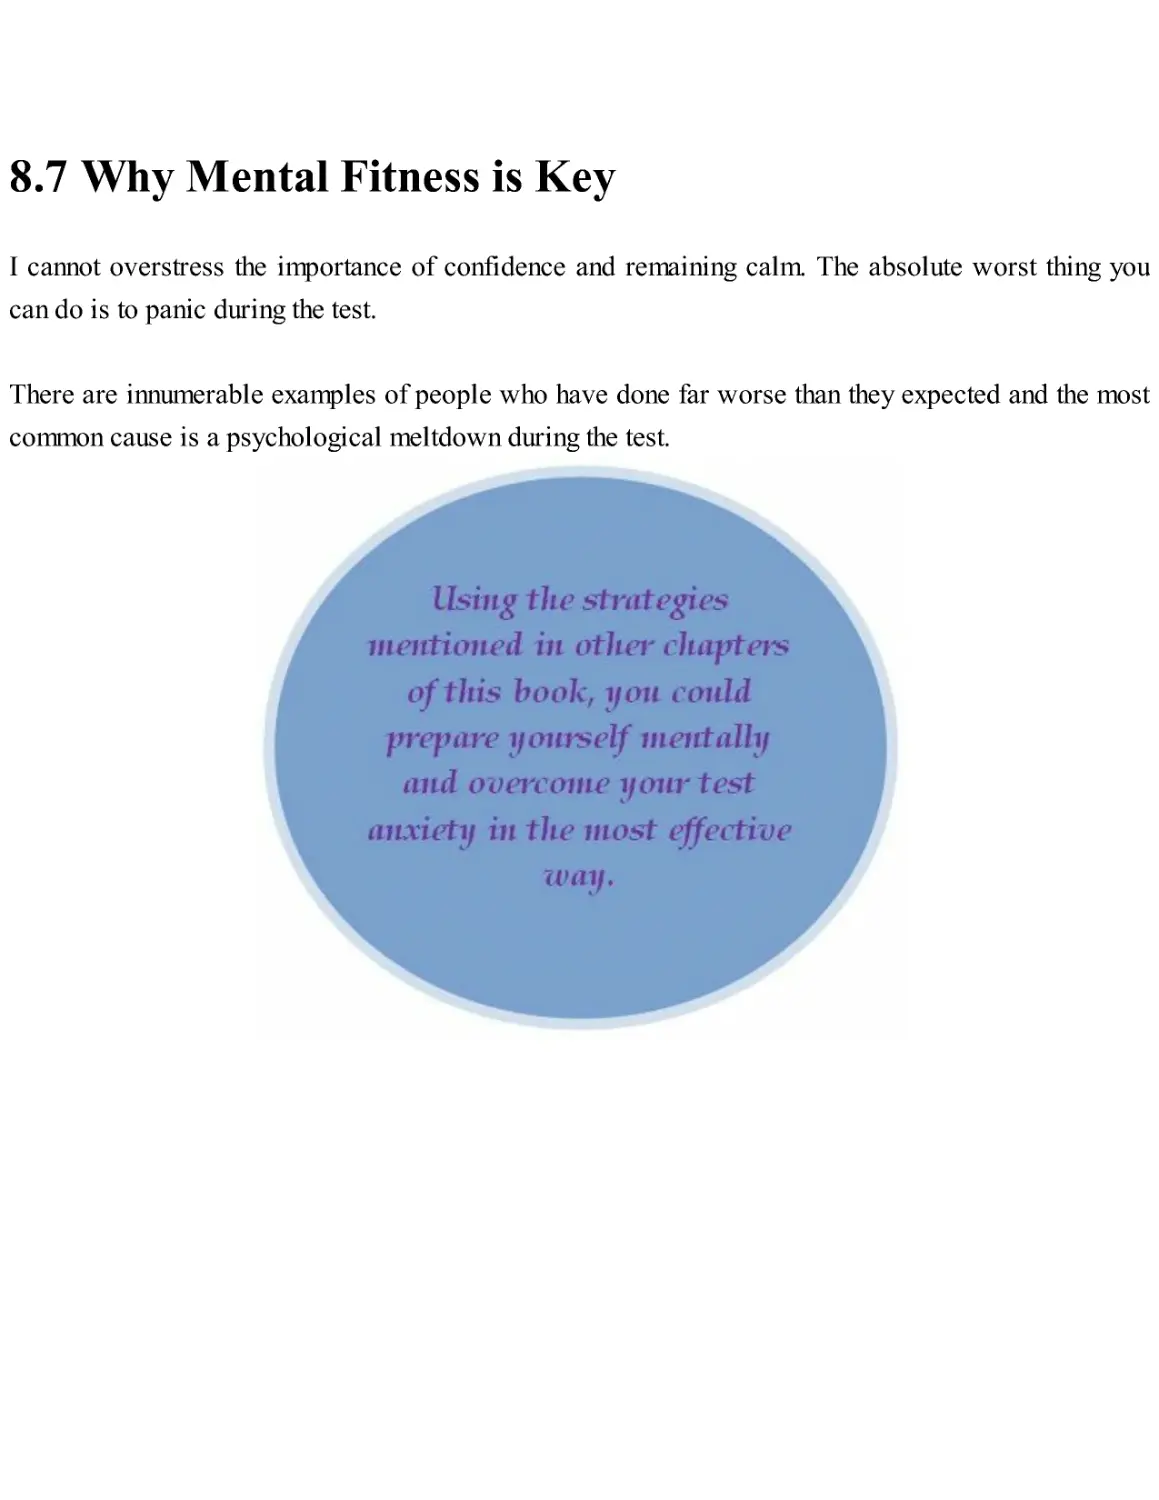 8.7 Why Mental Fitness is Key